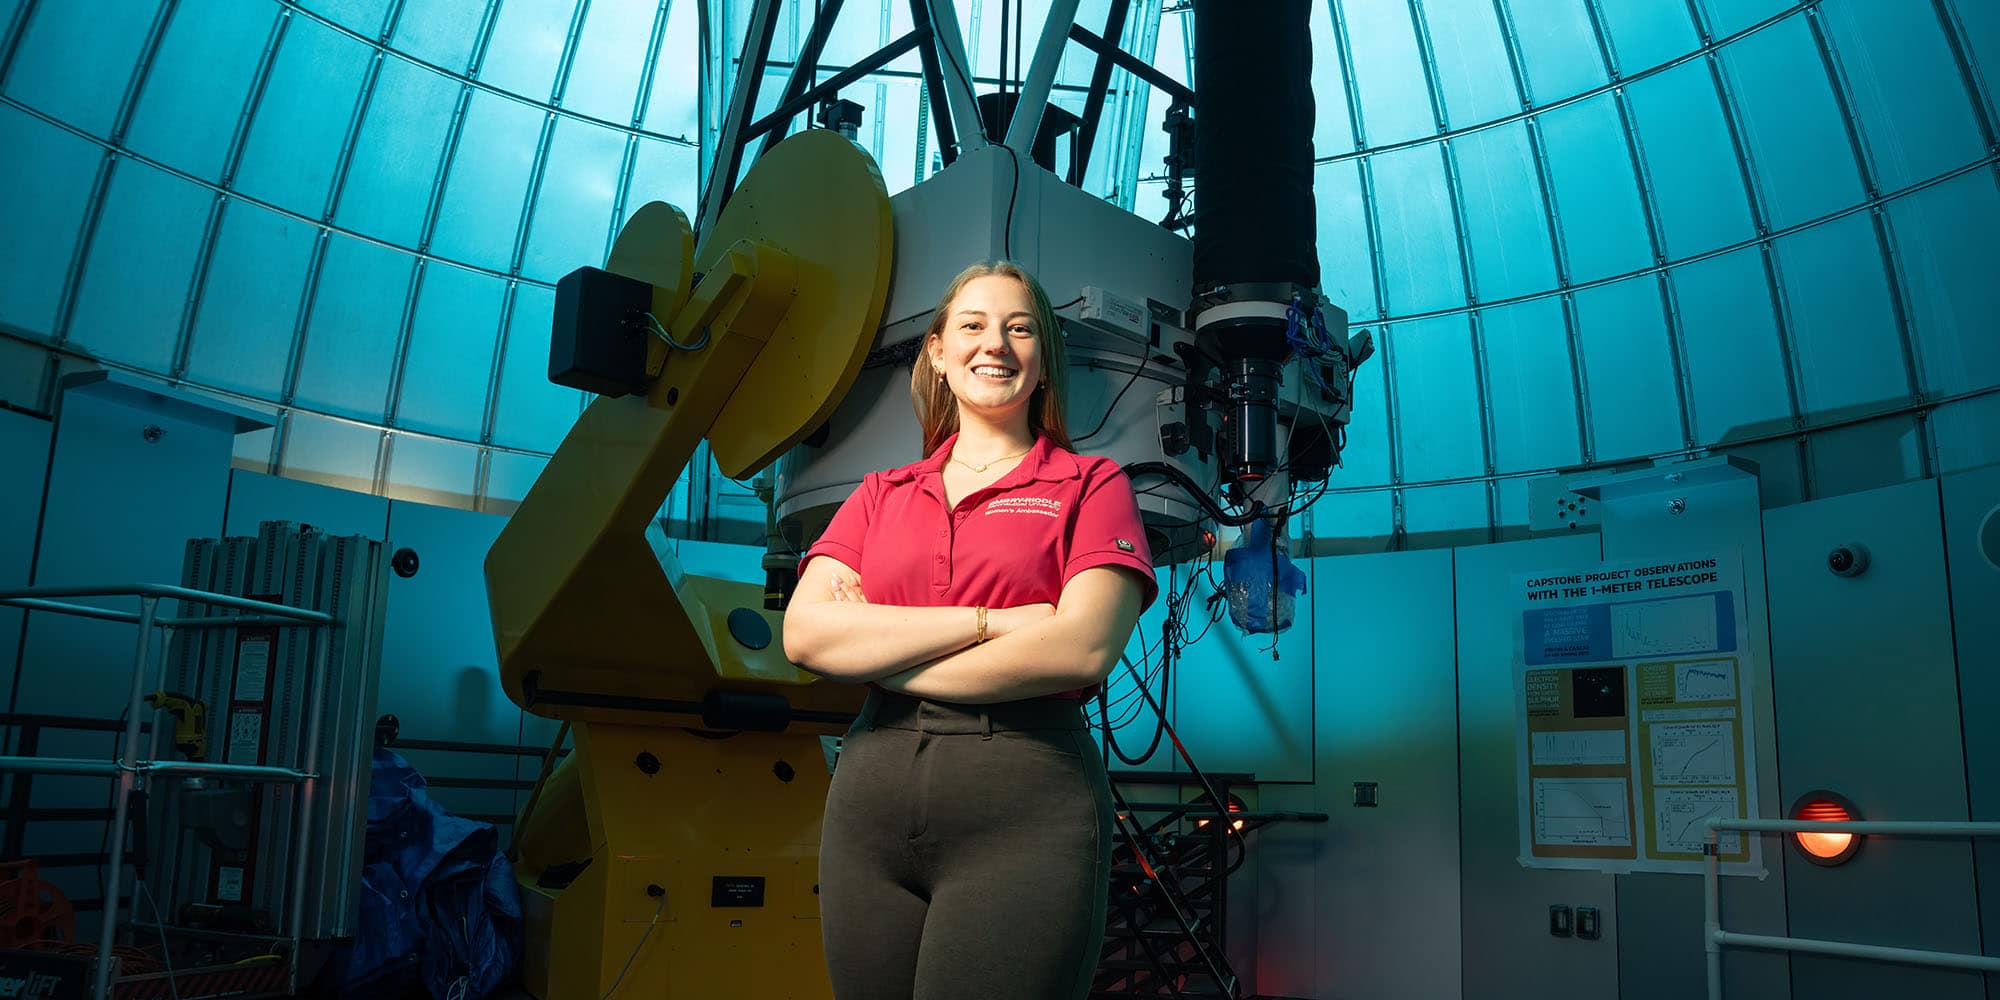 Logan poses with her arms crossed in front of a two-ton telescope; a part of the dome walls visible in the background. Logan is a white woman with dark blond hair pulled back, wearing a red polo shirt with the Embry-Riddle wordmark.